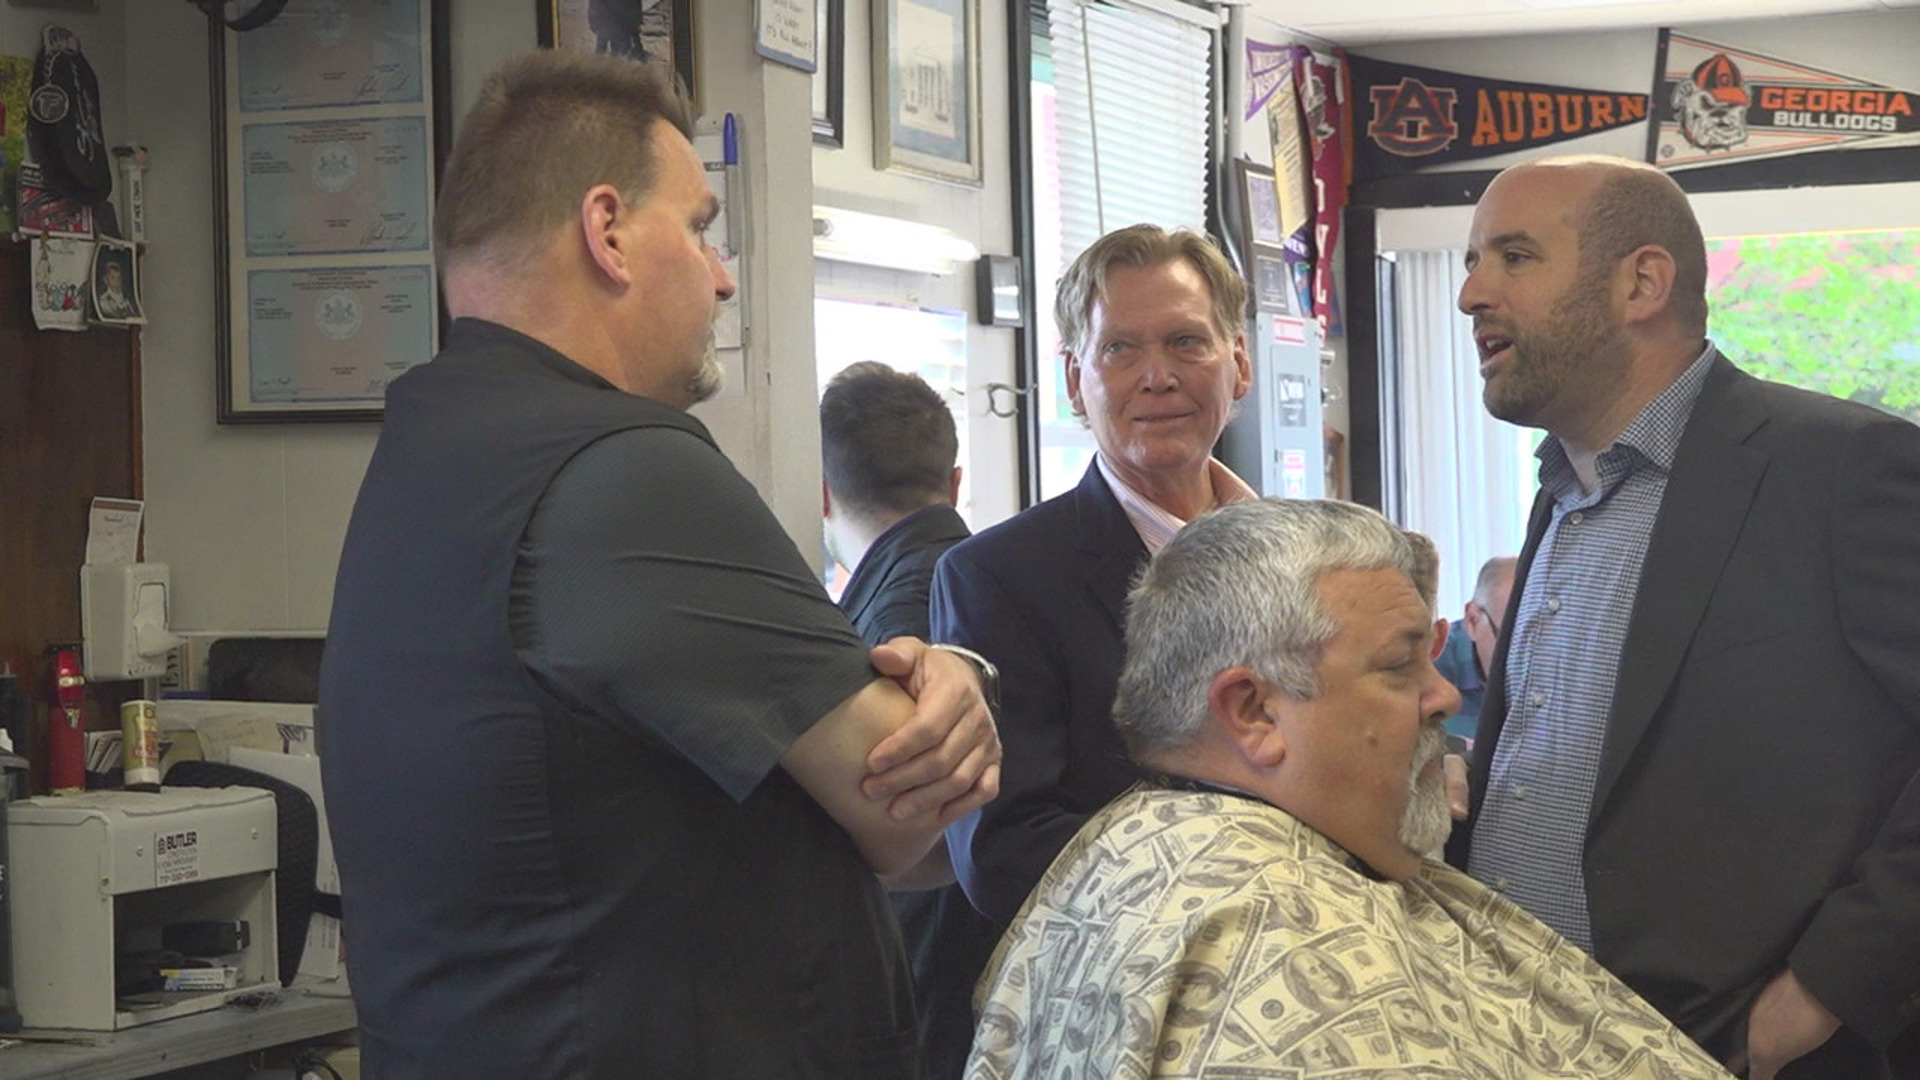 The Shapiro administration met with small business owners in New Cumberland to promote investment in small businesses.